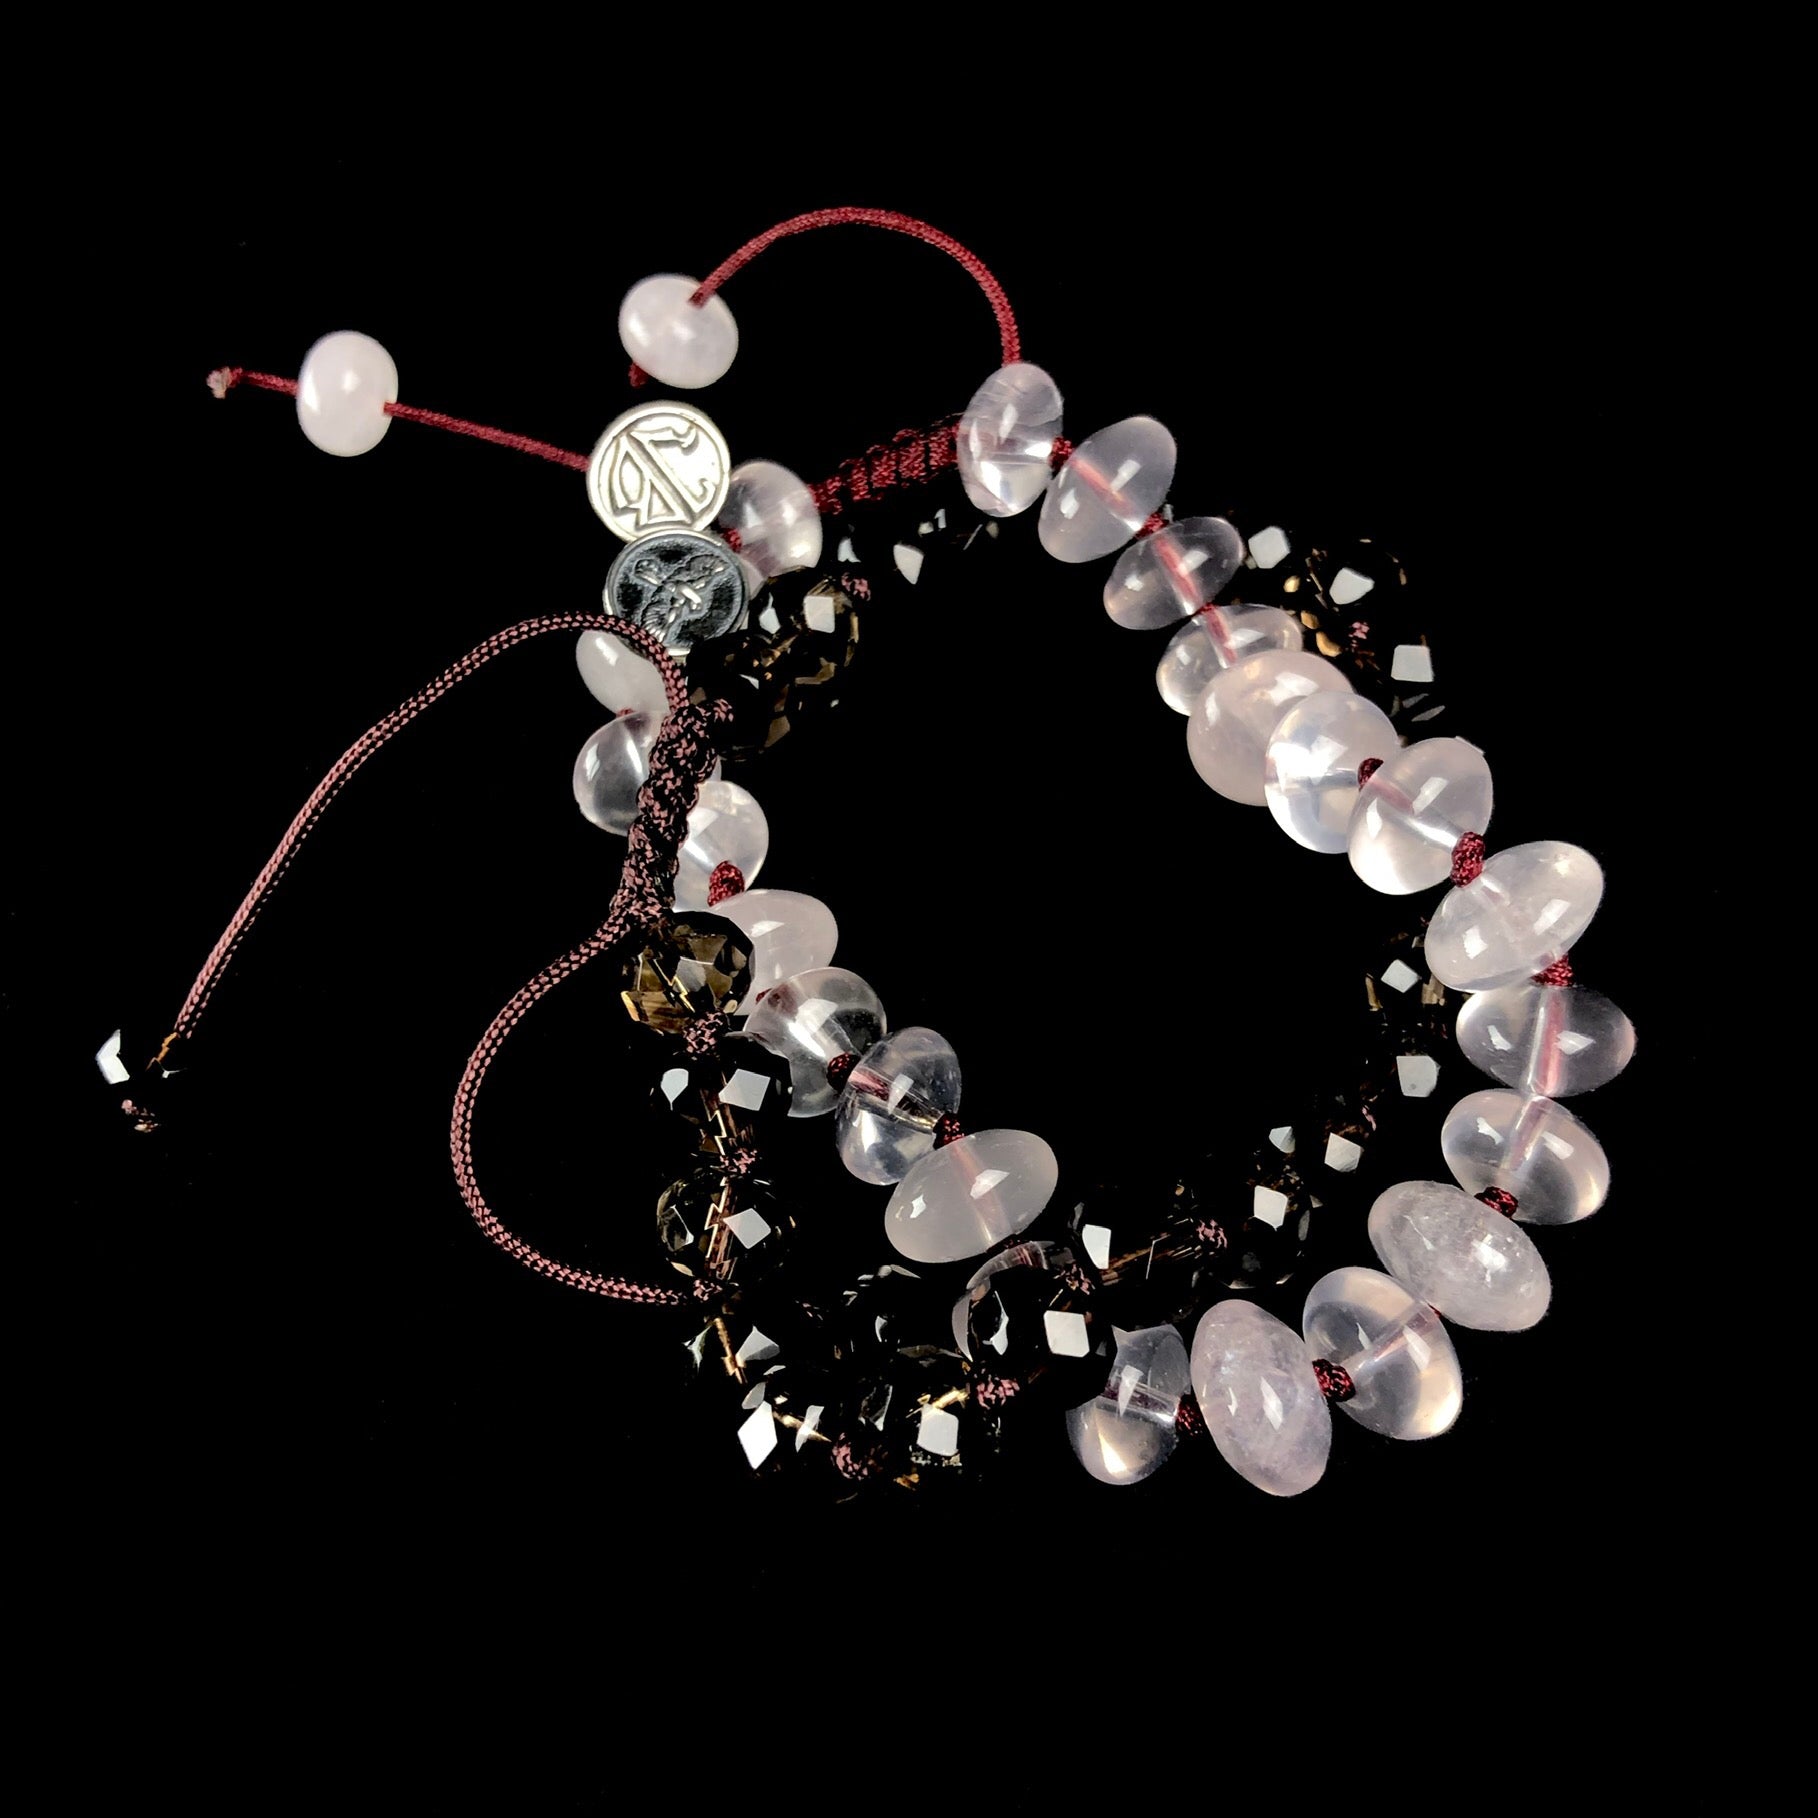 Translucent light pink colored stone bracelet with dark grey faceted stone bracelet on knotted cords